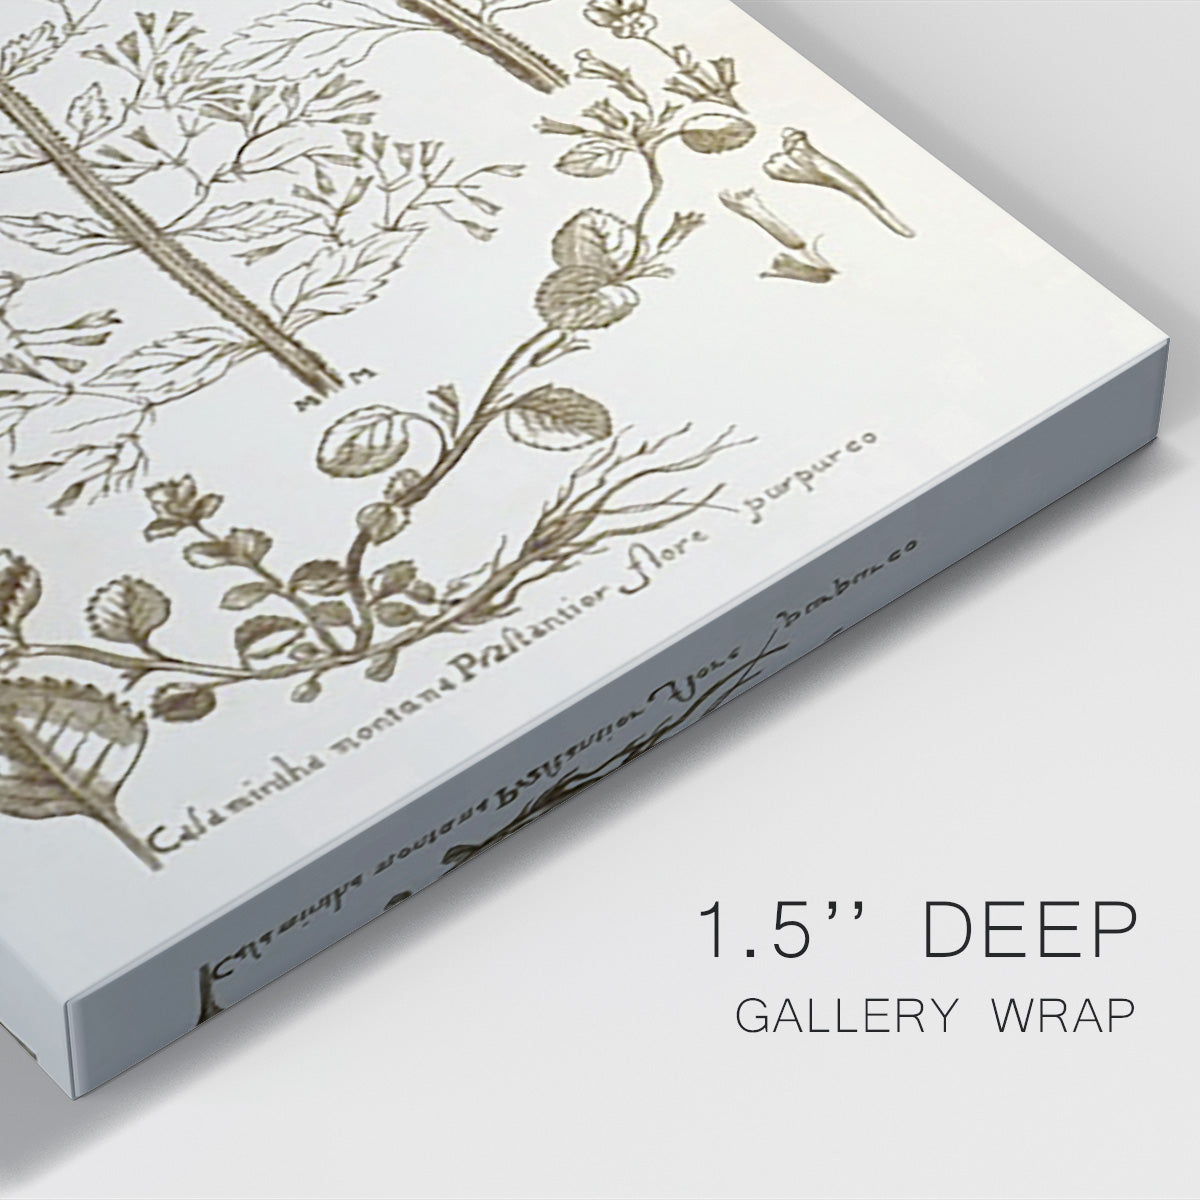 Sepia Botanical Journal V Premium Gallery Wrapped Canvas - Ready to Hang